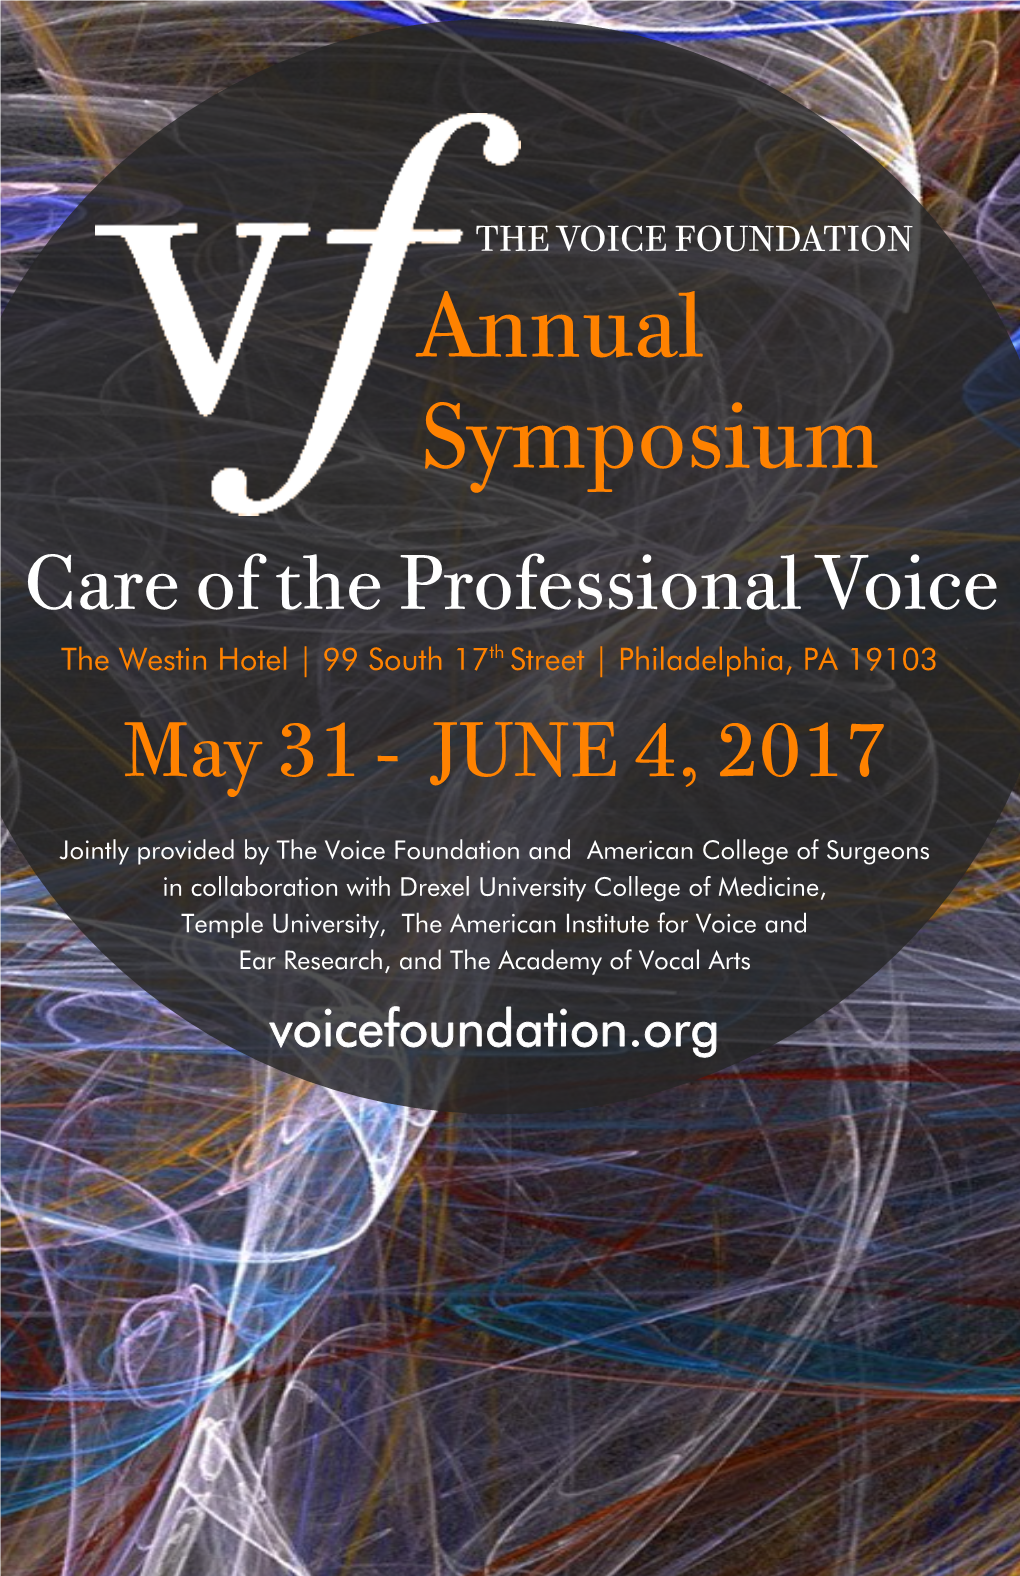 2017 Symposium Program for Registration Pricing and Further Information